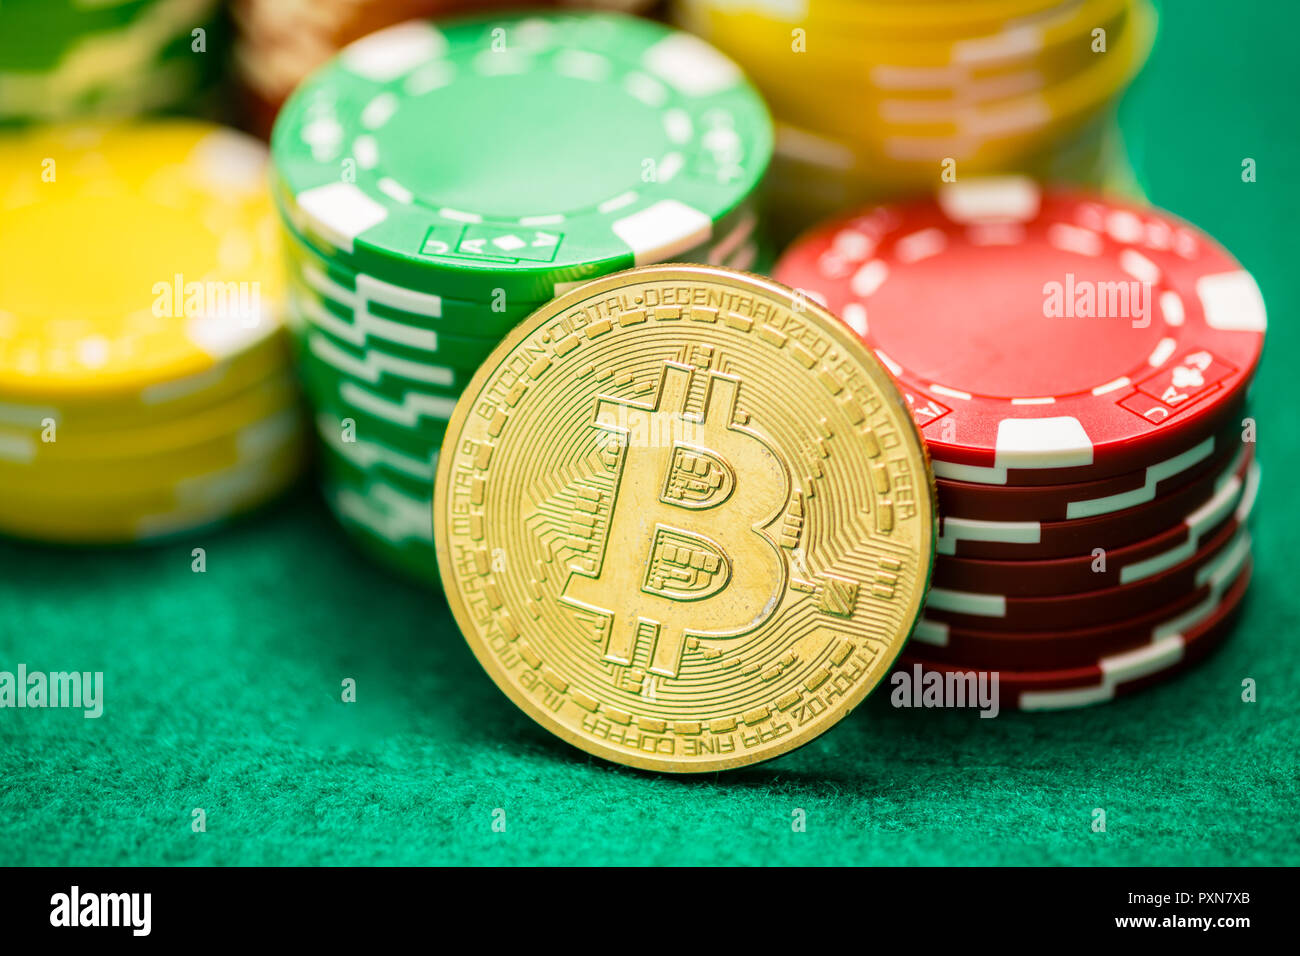 5 Ways Of online casino bitcoin That Can Drive You Bankrupt - Fast!